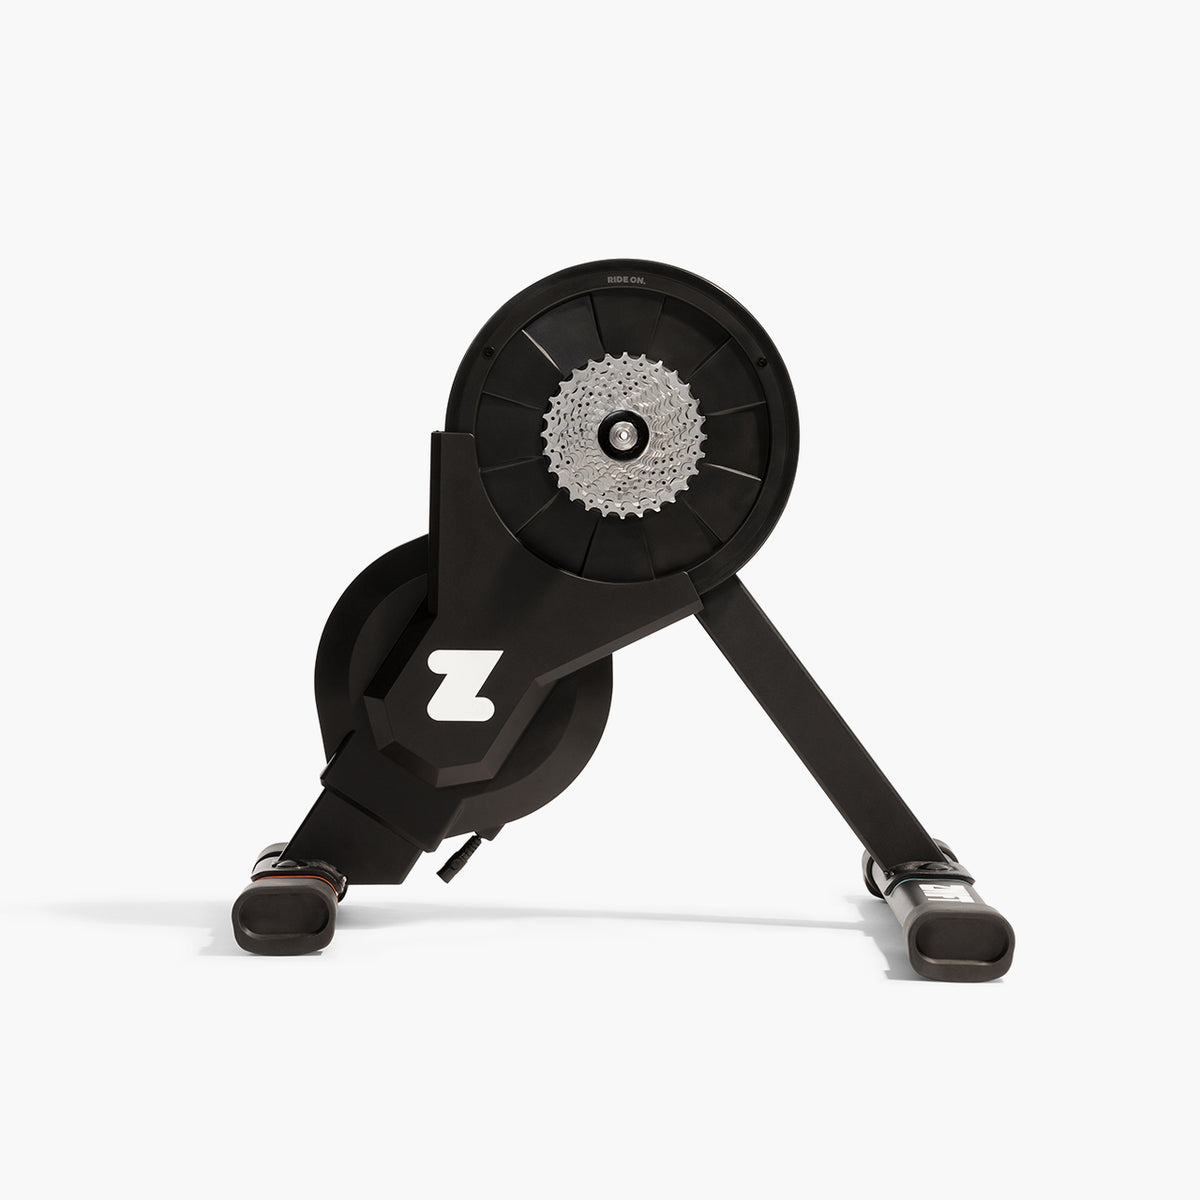 Zwift Hub Smart Turbo Trainer with 10 speed cassette